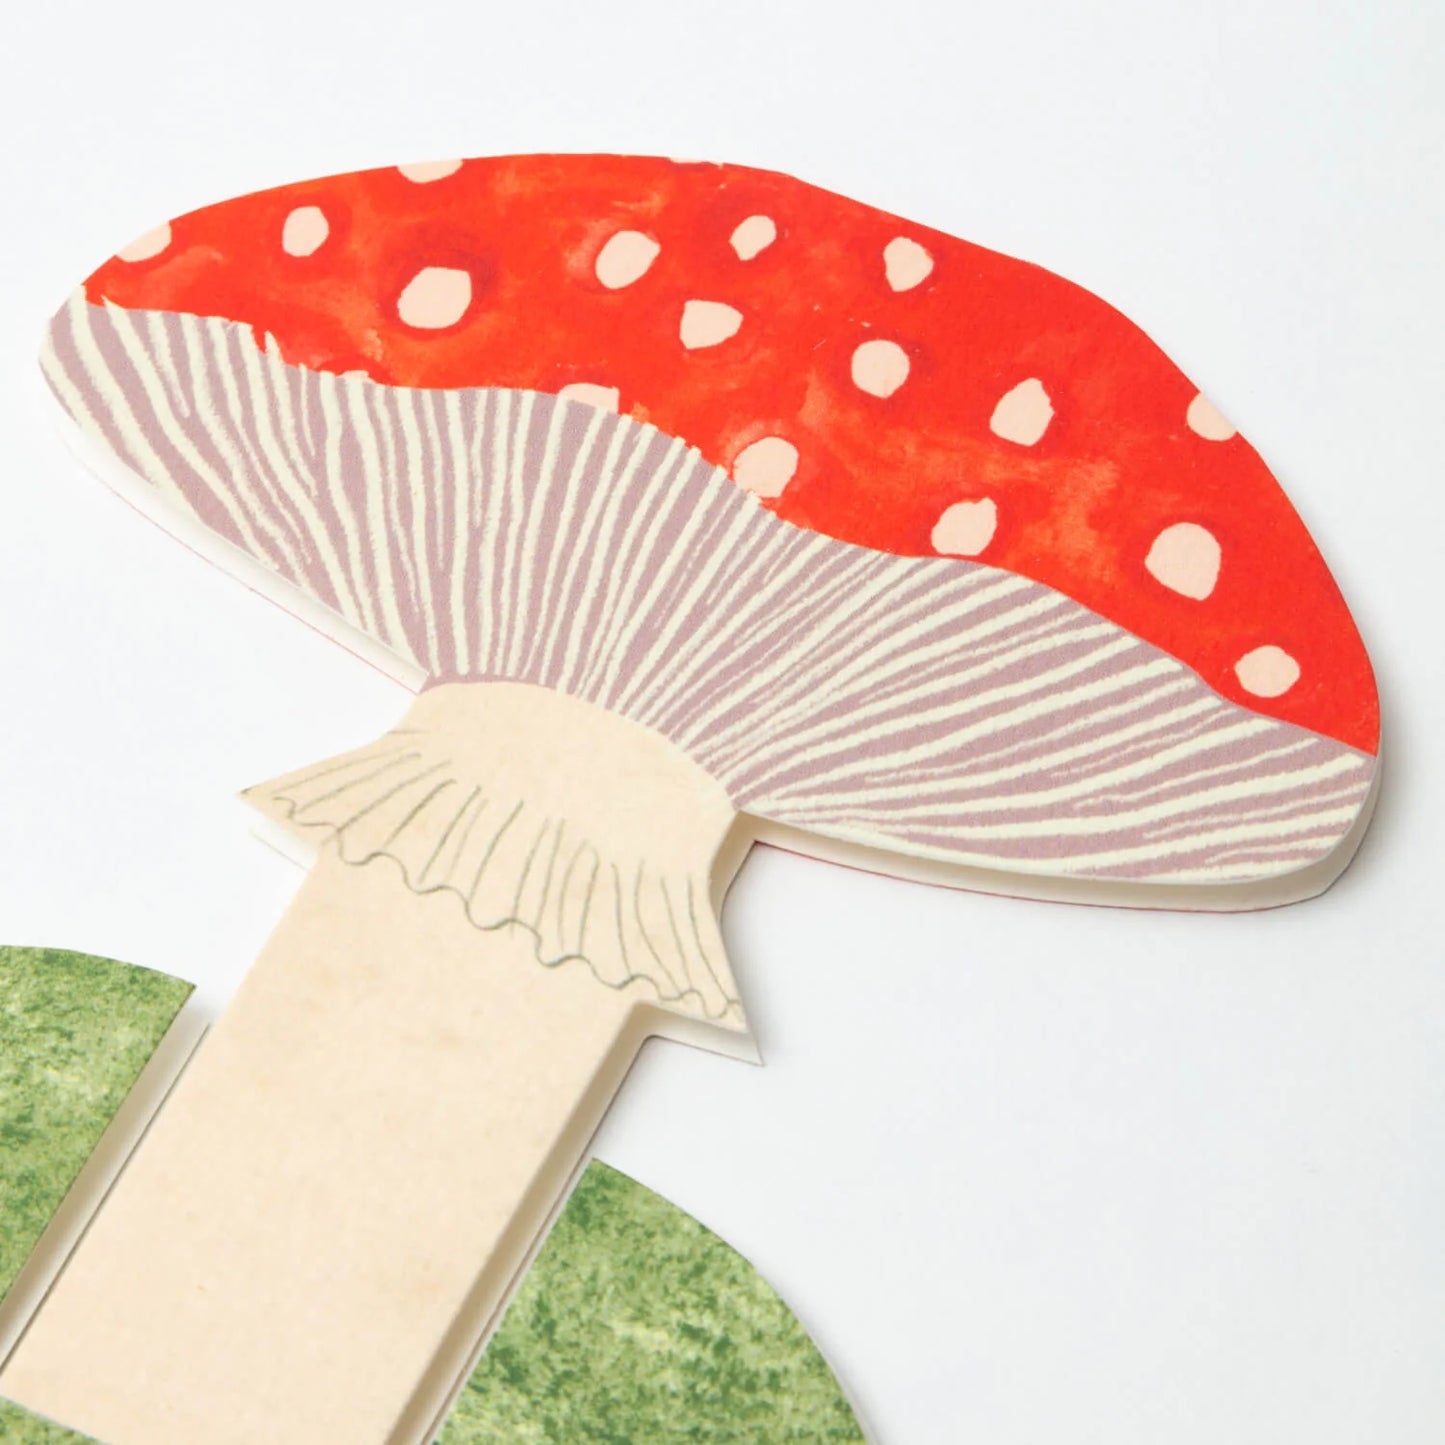 Toadstool stand up card